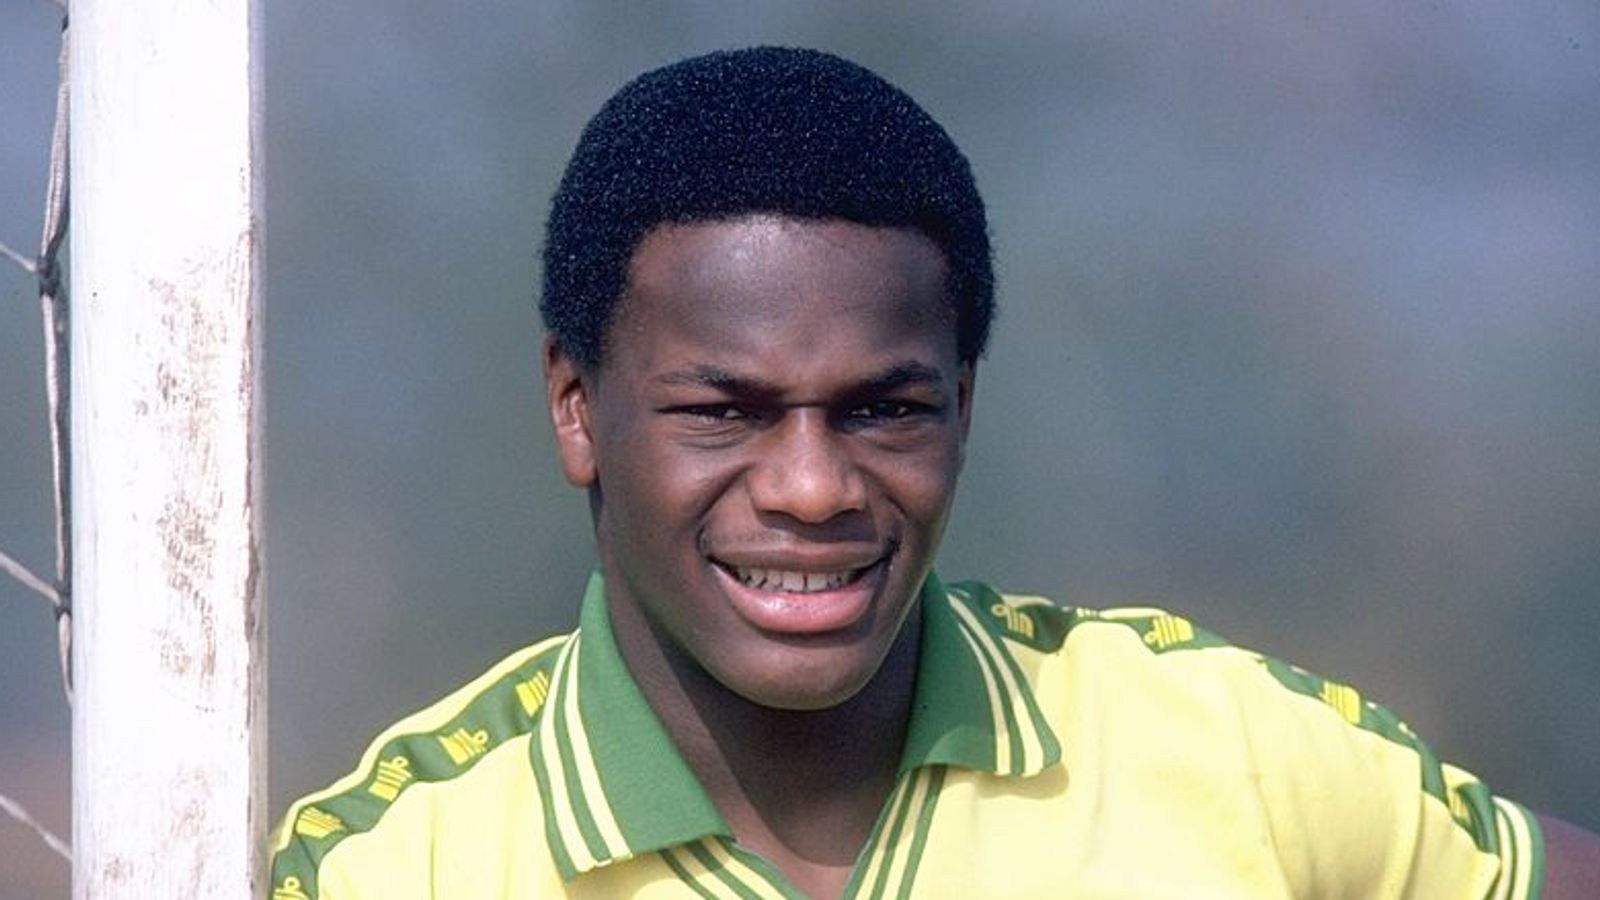 Justin Fashanu: LGBTQ+ Norwich fan group raising money to install statue of first openly gay footballer